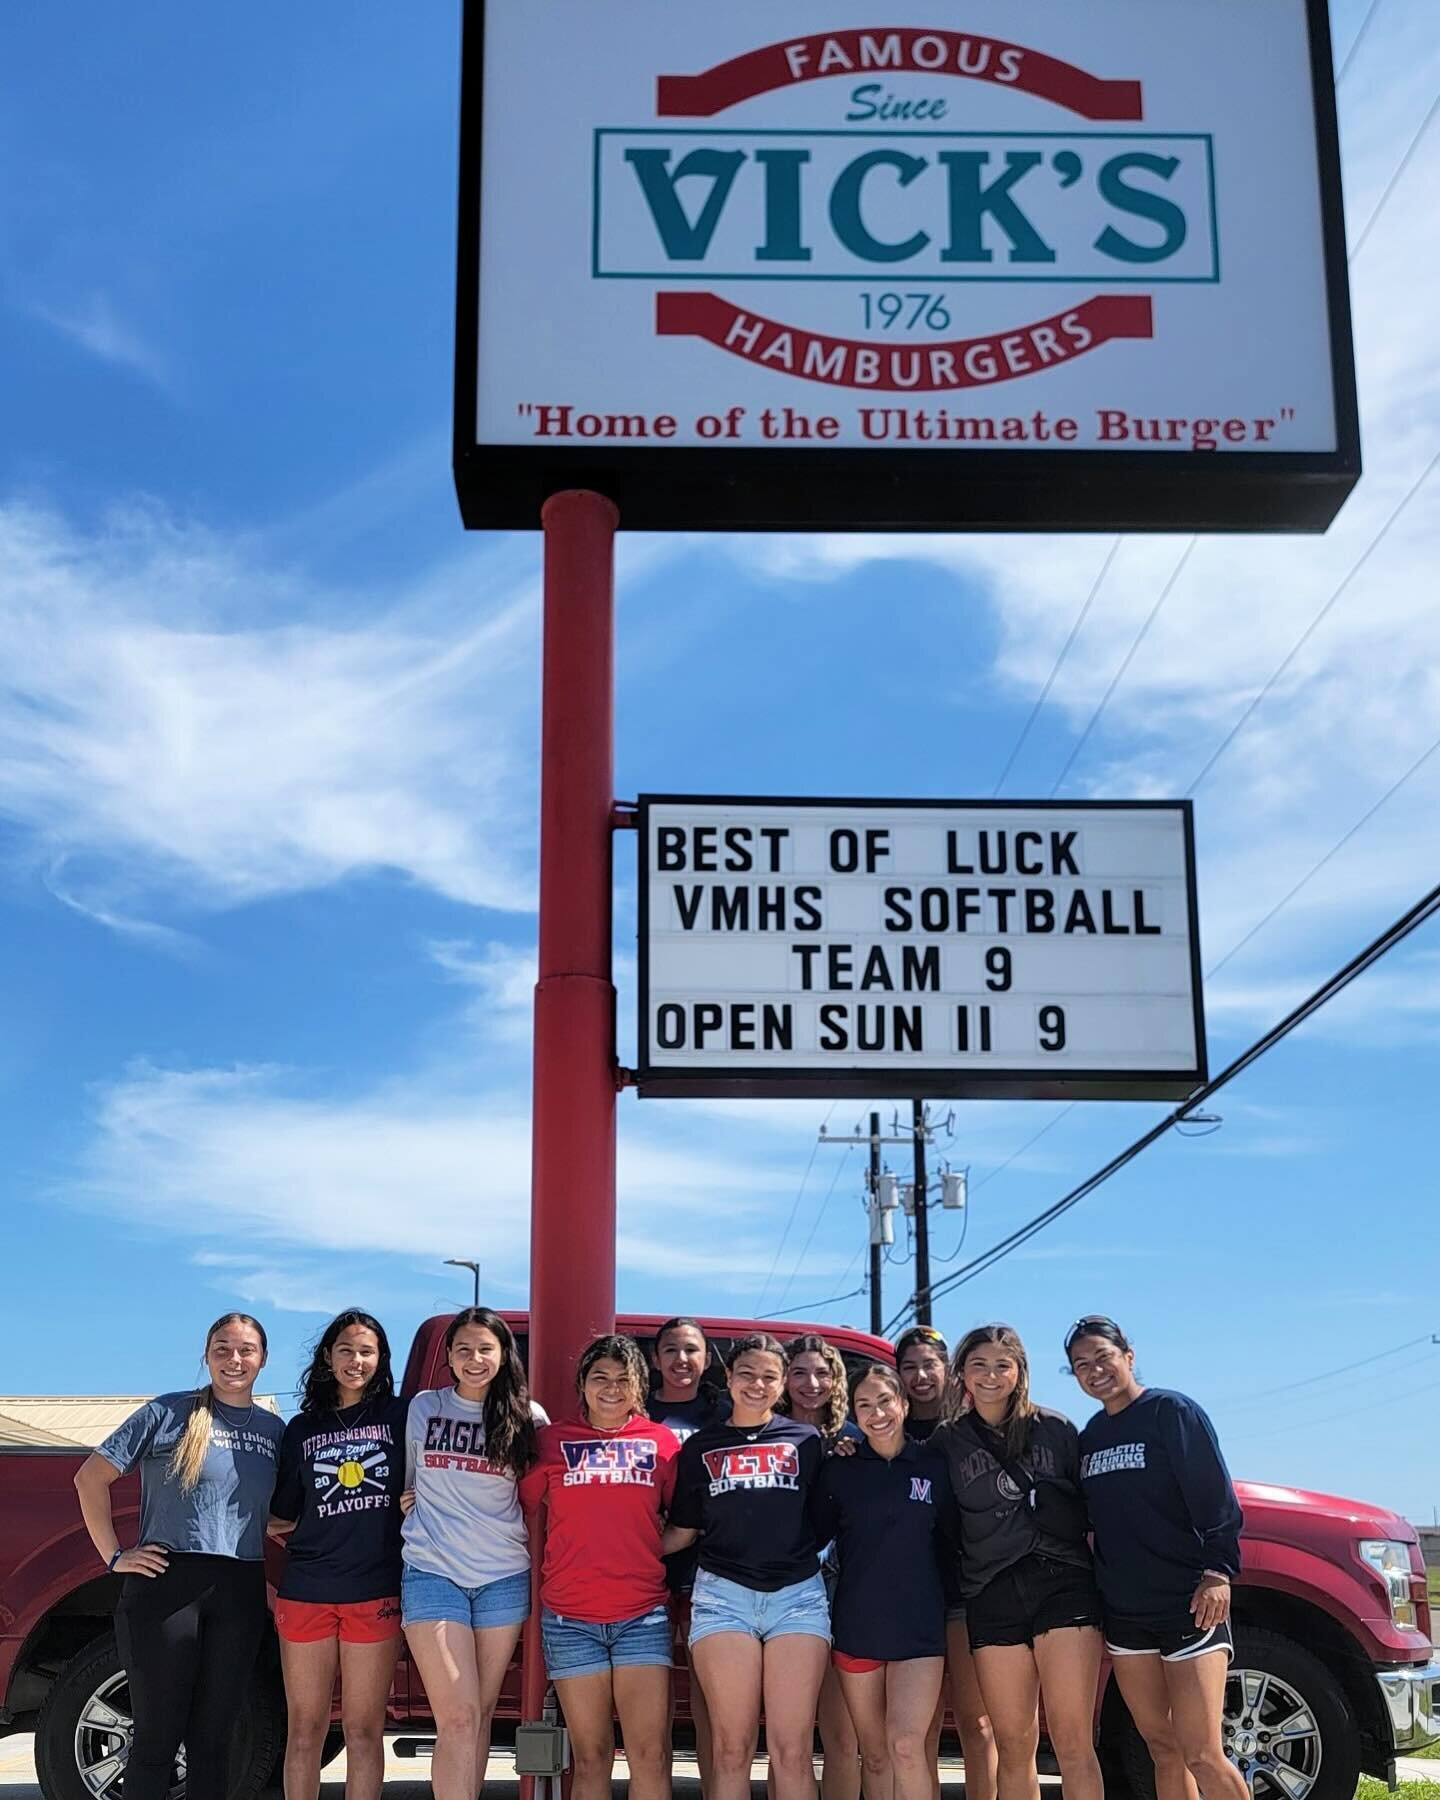 @vmhseaglesoftball had their Burgers and Banners event on Sunday at our Saratoga location. Thanks for coming by and good luck this season!